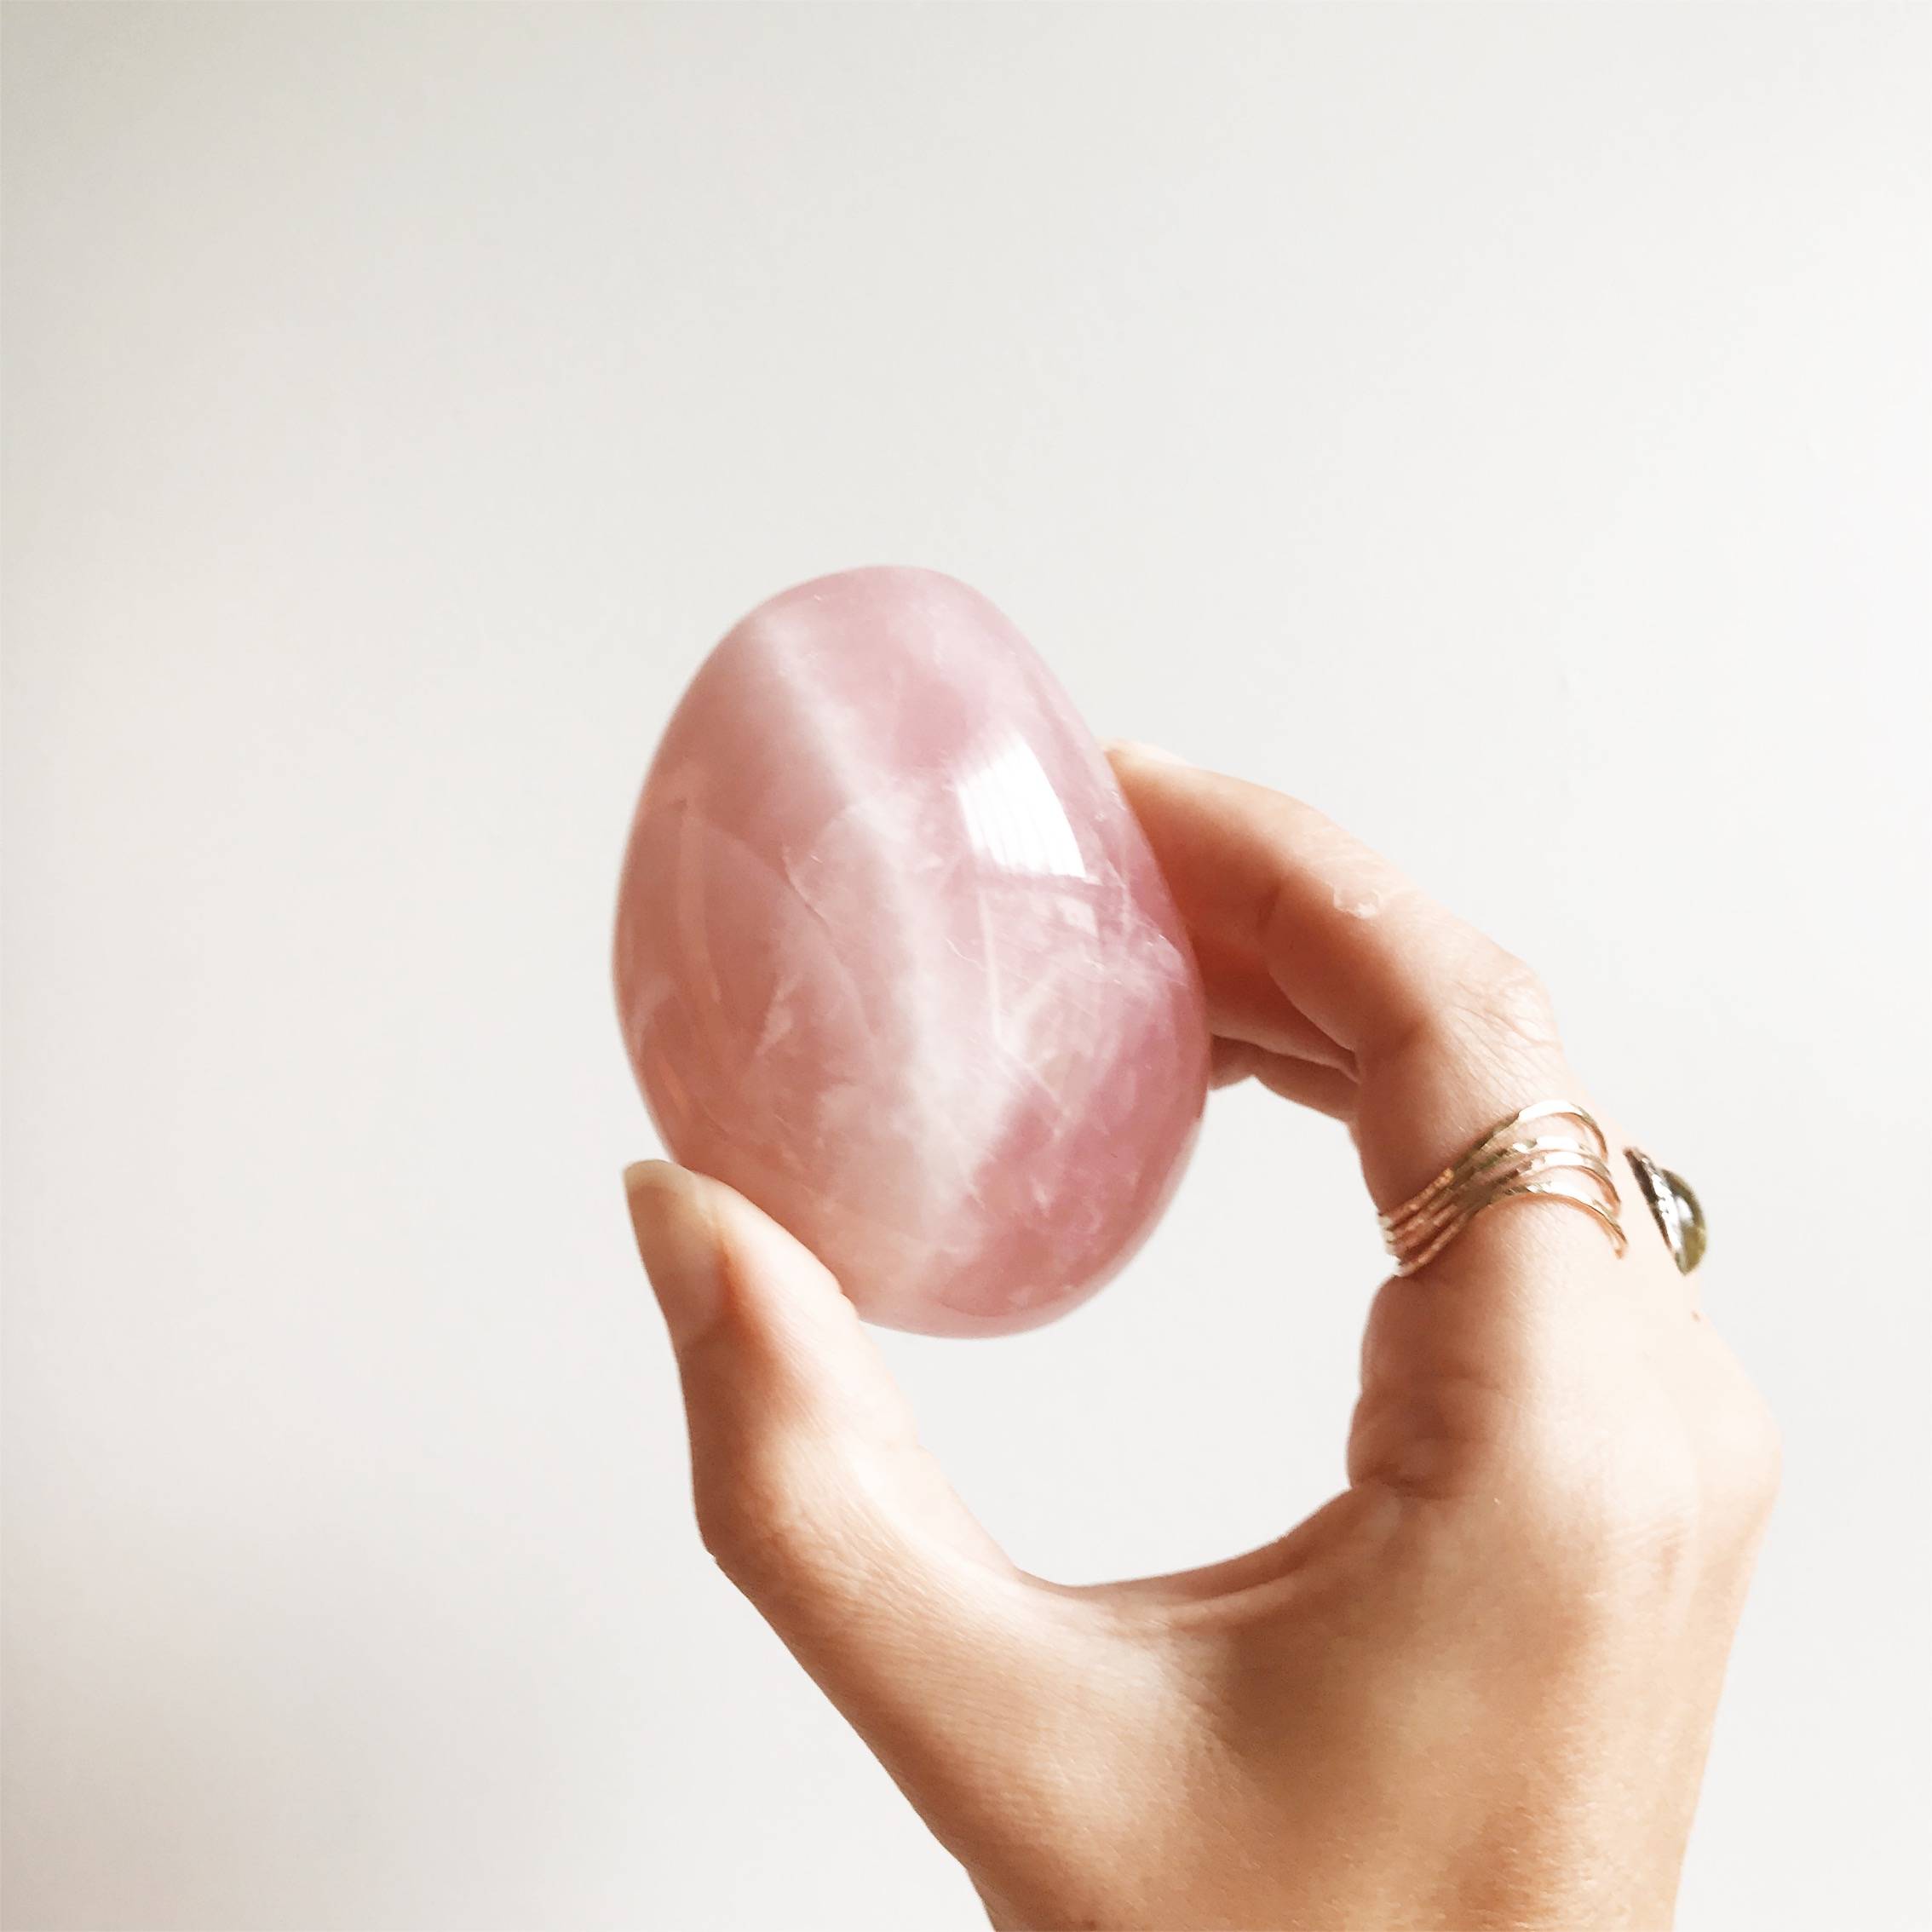 A Crystal for Beginners is a Rose Quartz Palm Stone